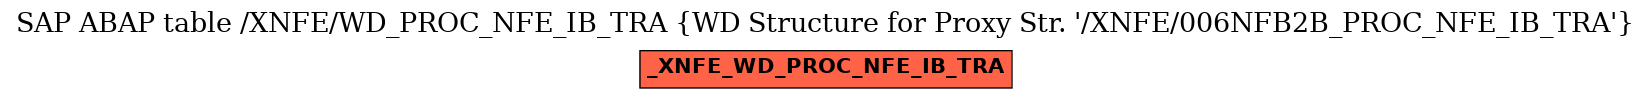 E-R Diagram for table /XNFE/WD_PROC_NFE_IB_TRA (WD Structure for Proxy Str. 